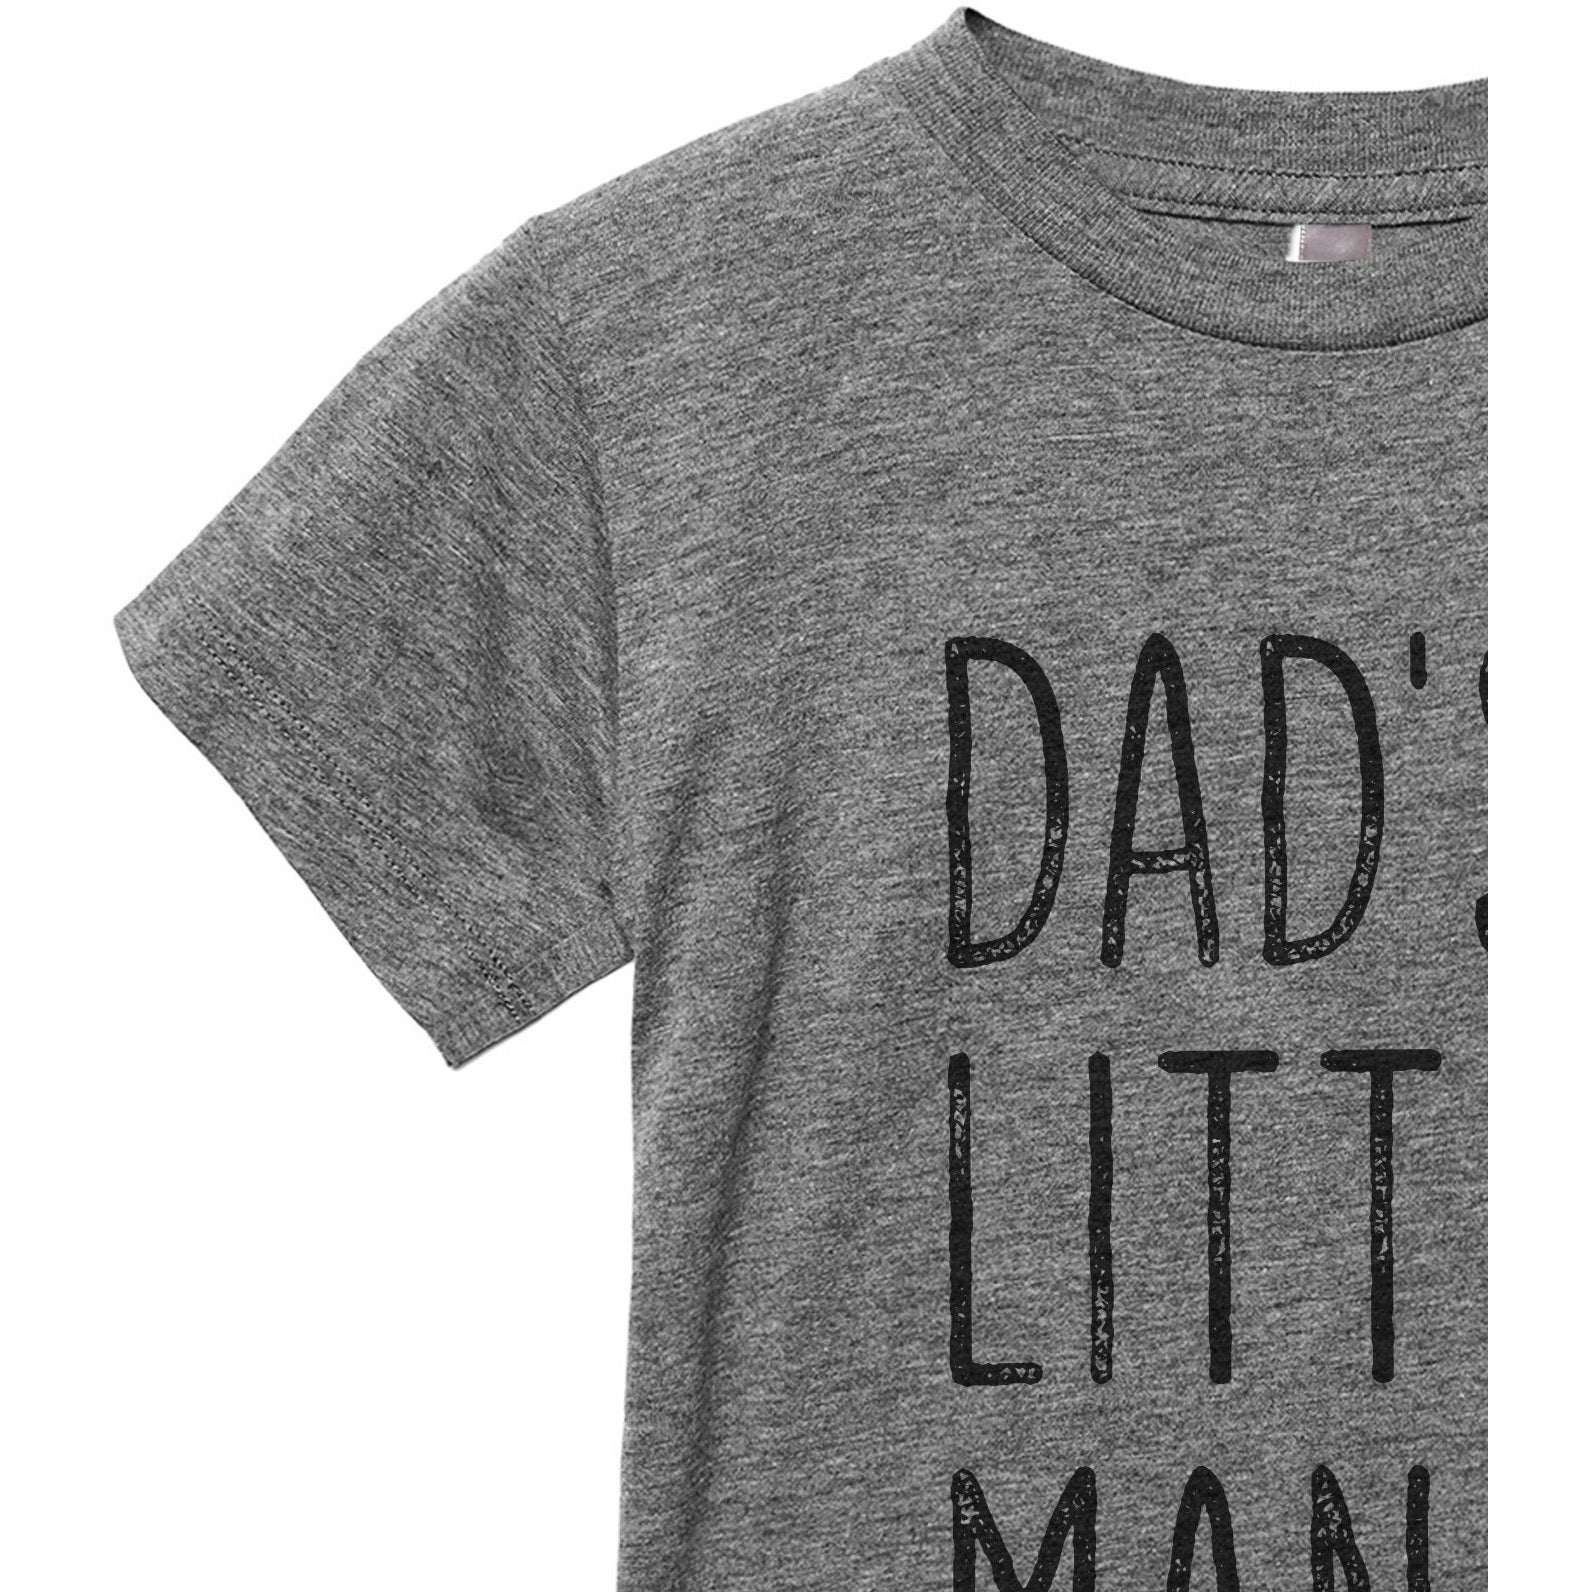 Dad's Little Man Toddler's Go-To Crewneck Tee Charcoal Close Up Sleeves Collar Details
